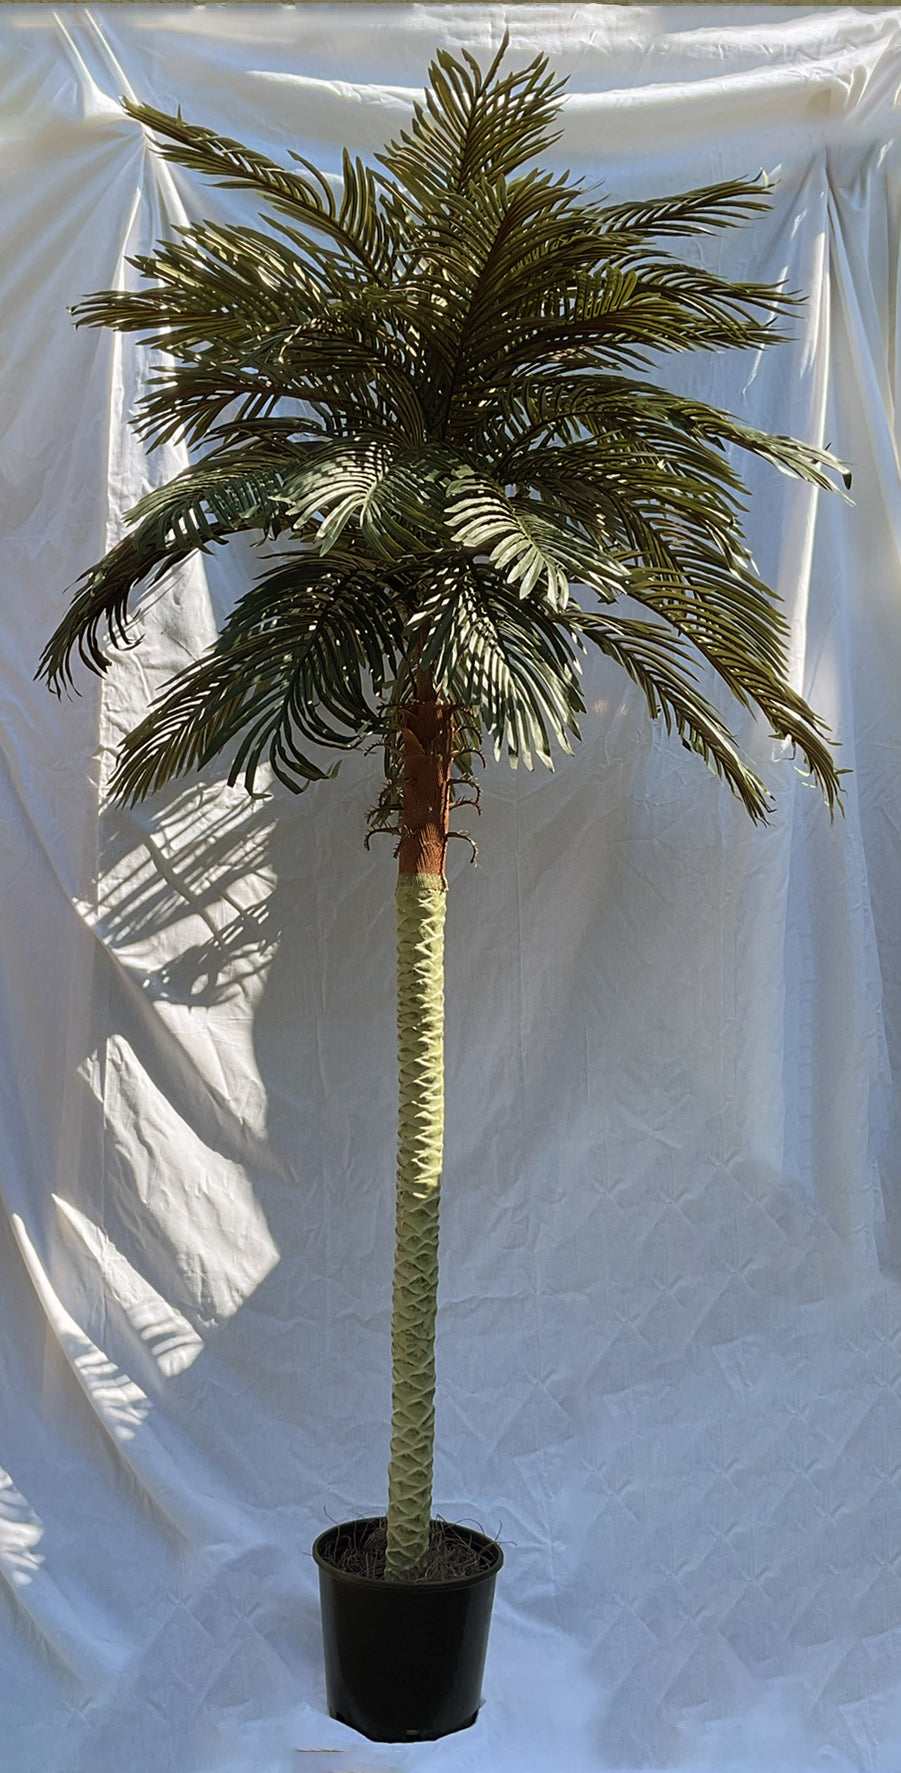 8 Foot Artificial Silk Phoenix Palm Tree for Indoor and Outdoor Silk Plants Canada